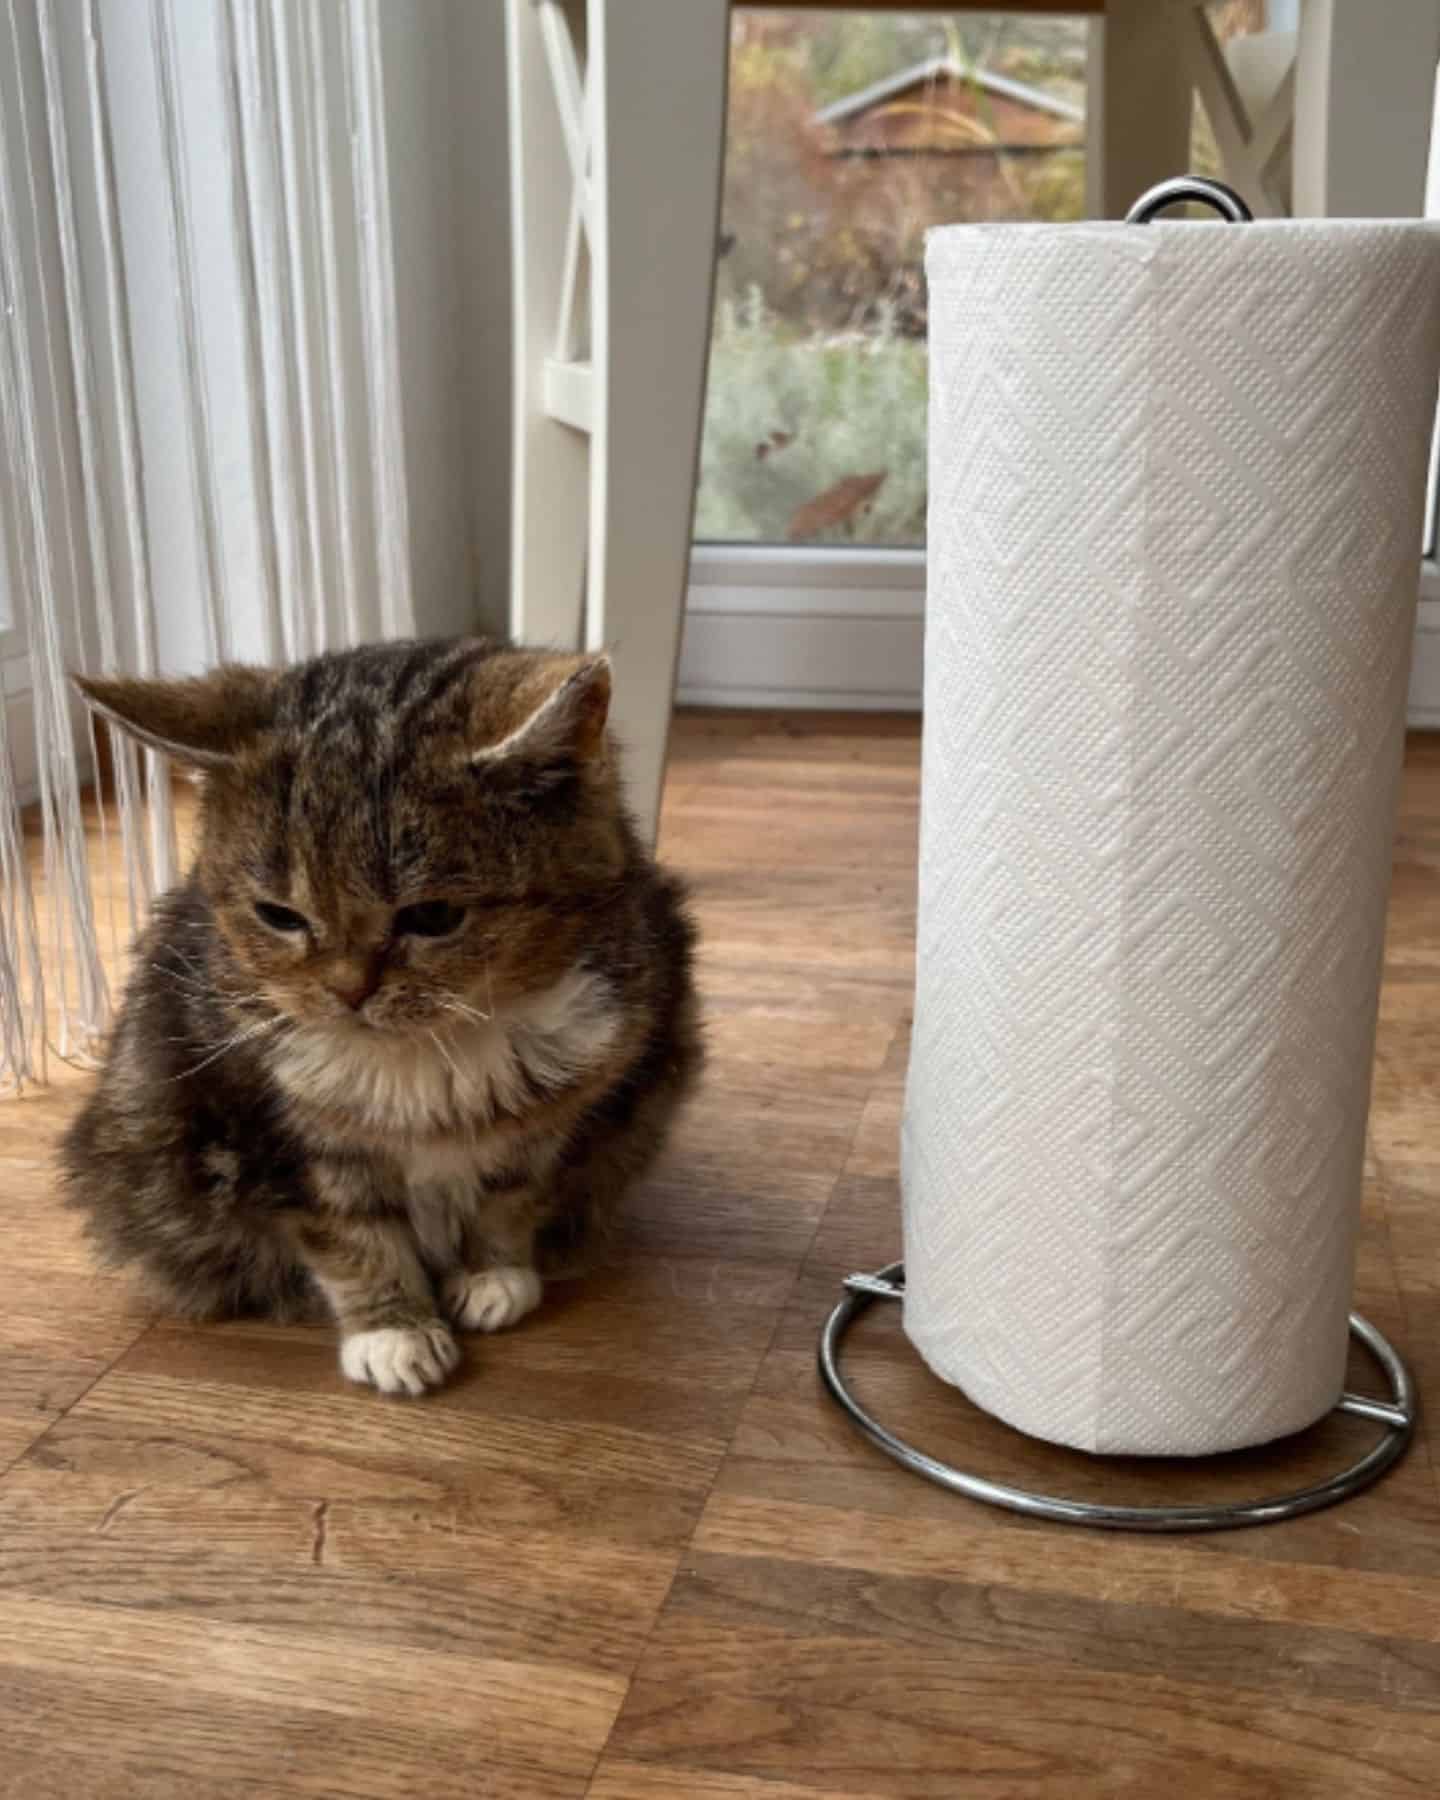 cat next to paper towel roll